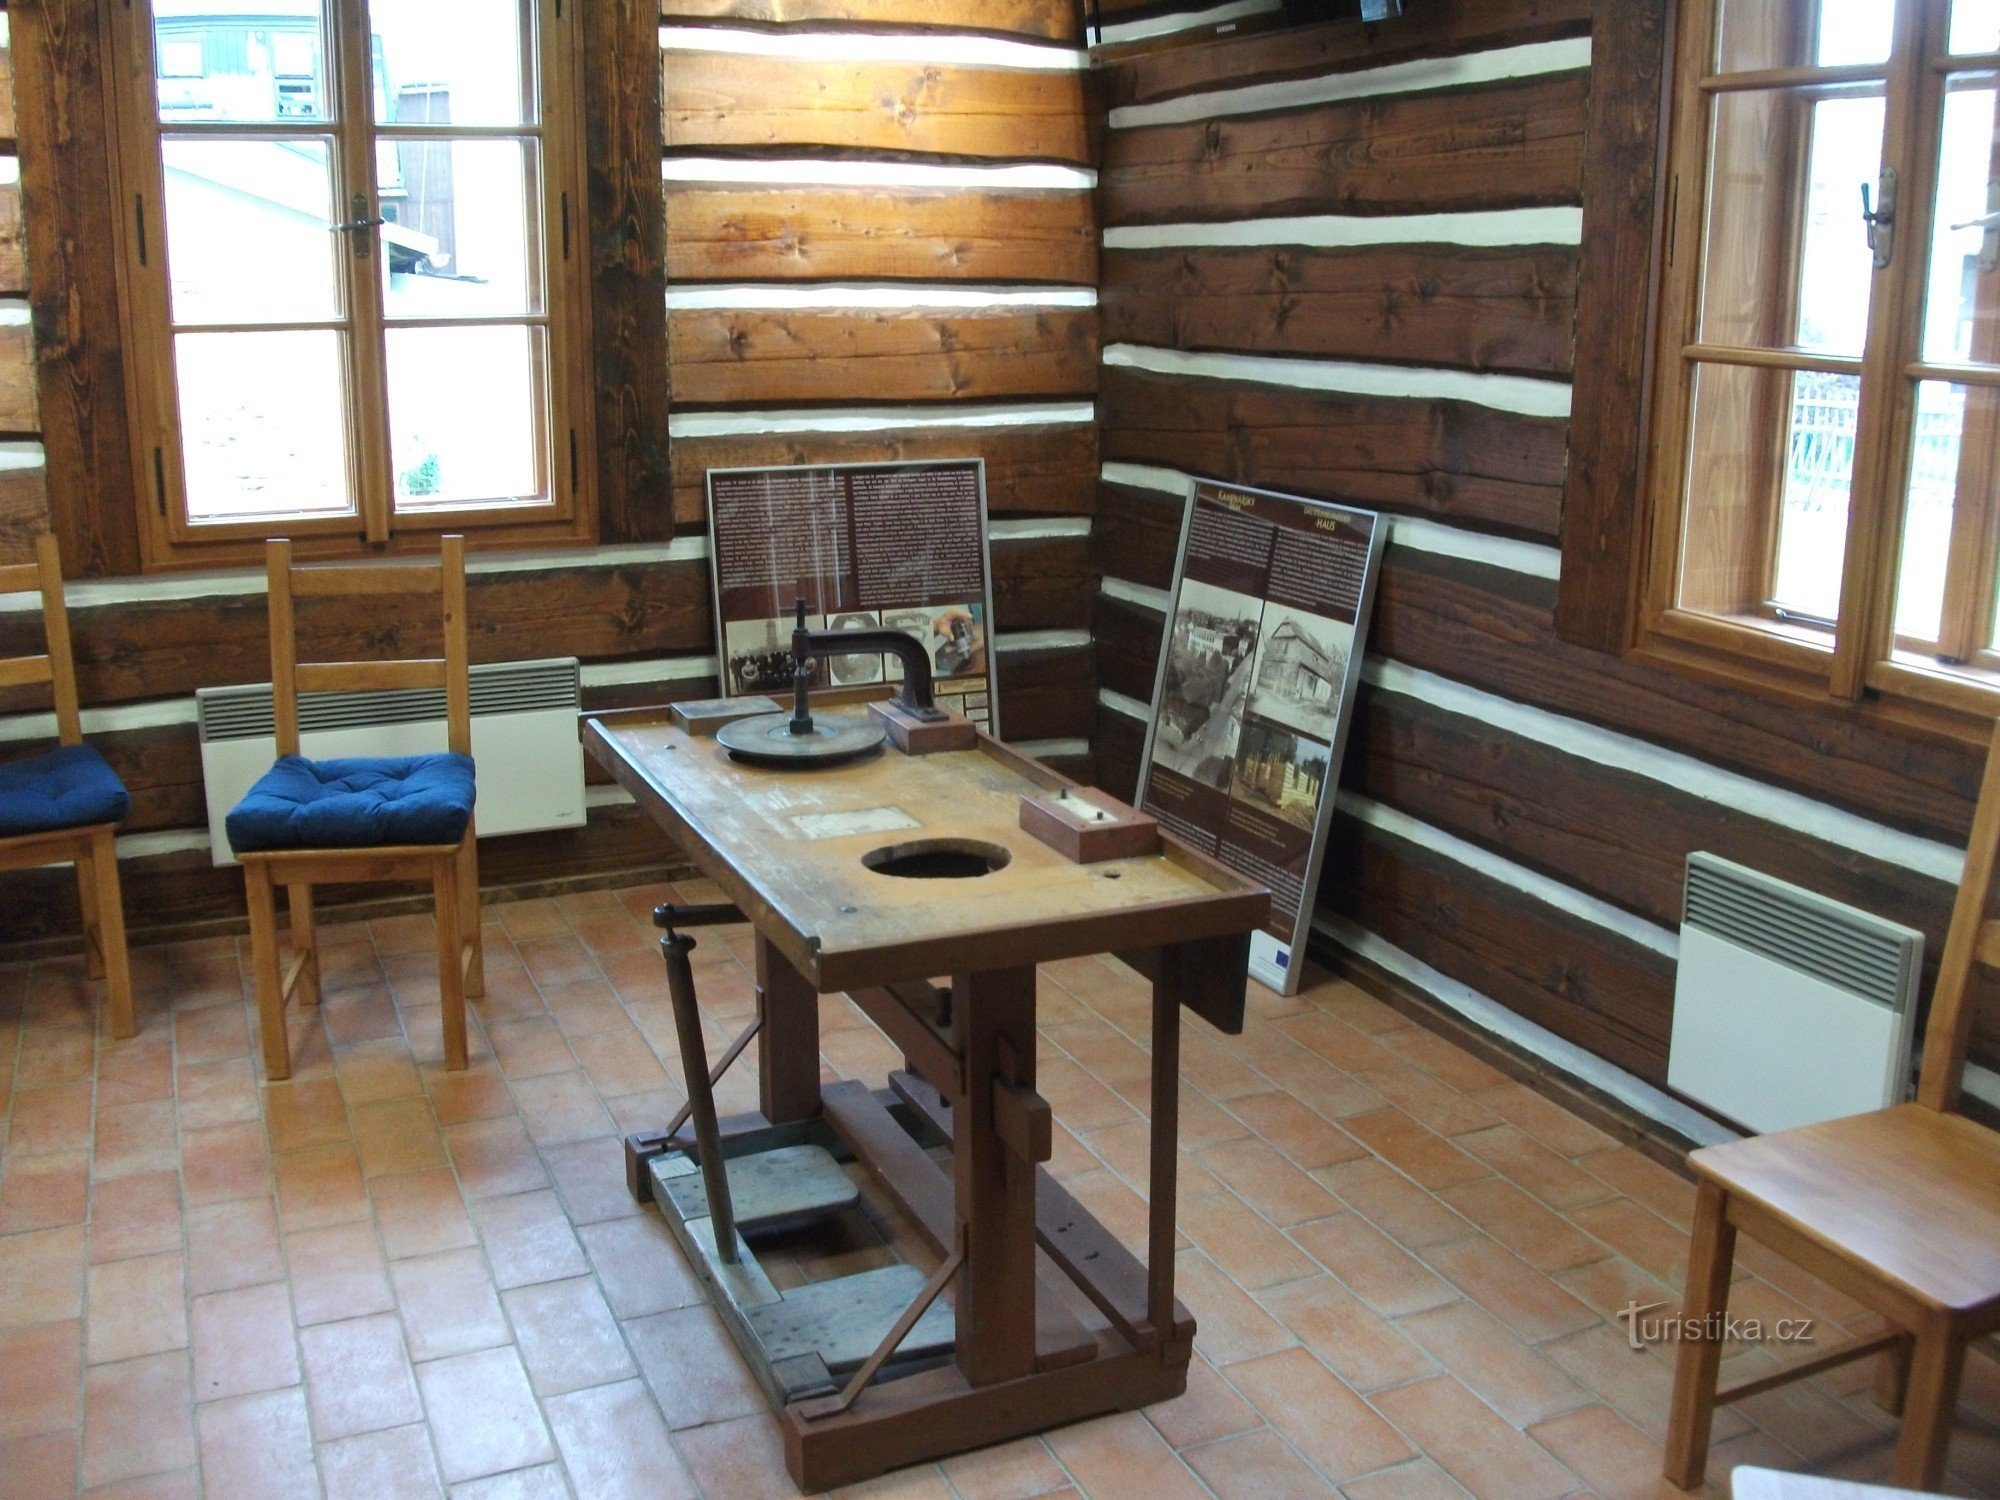 The interior of the Stone House also contains a workbench with machining tools